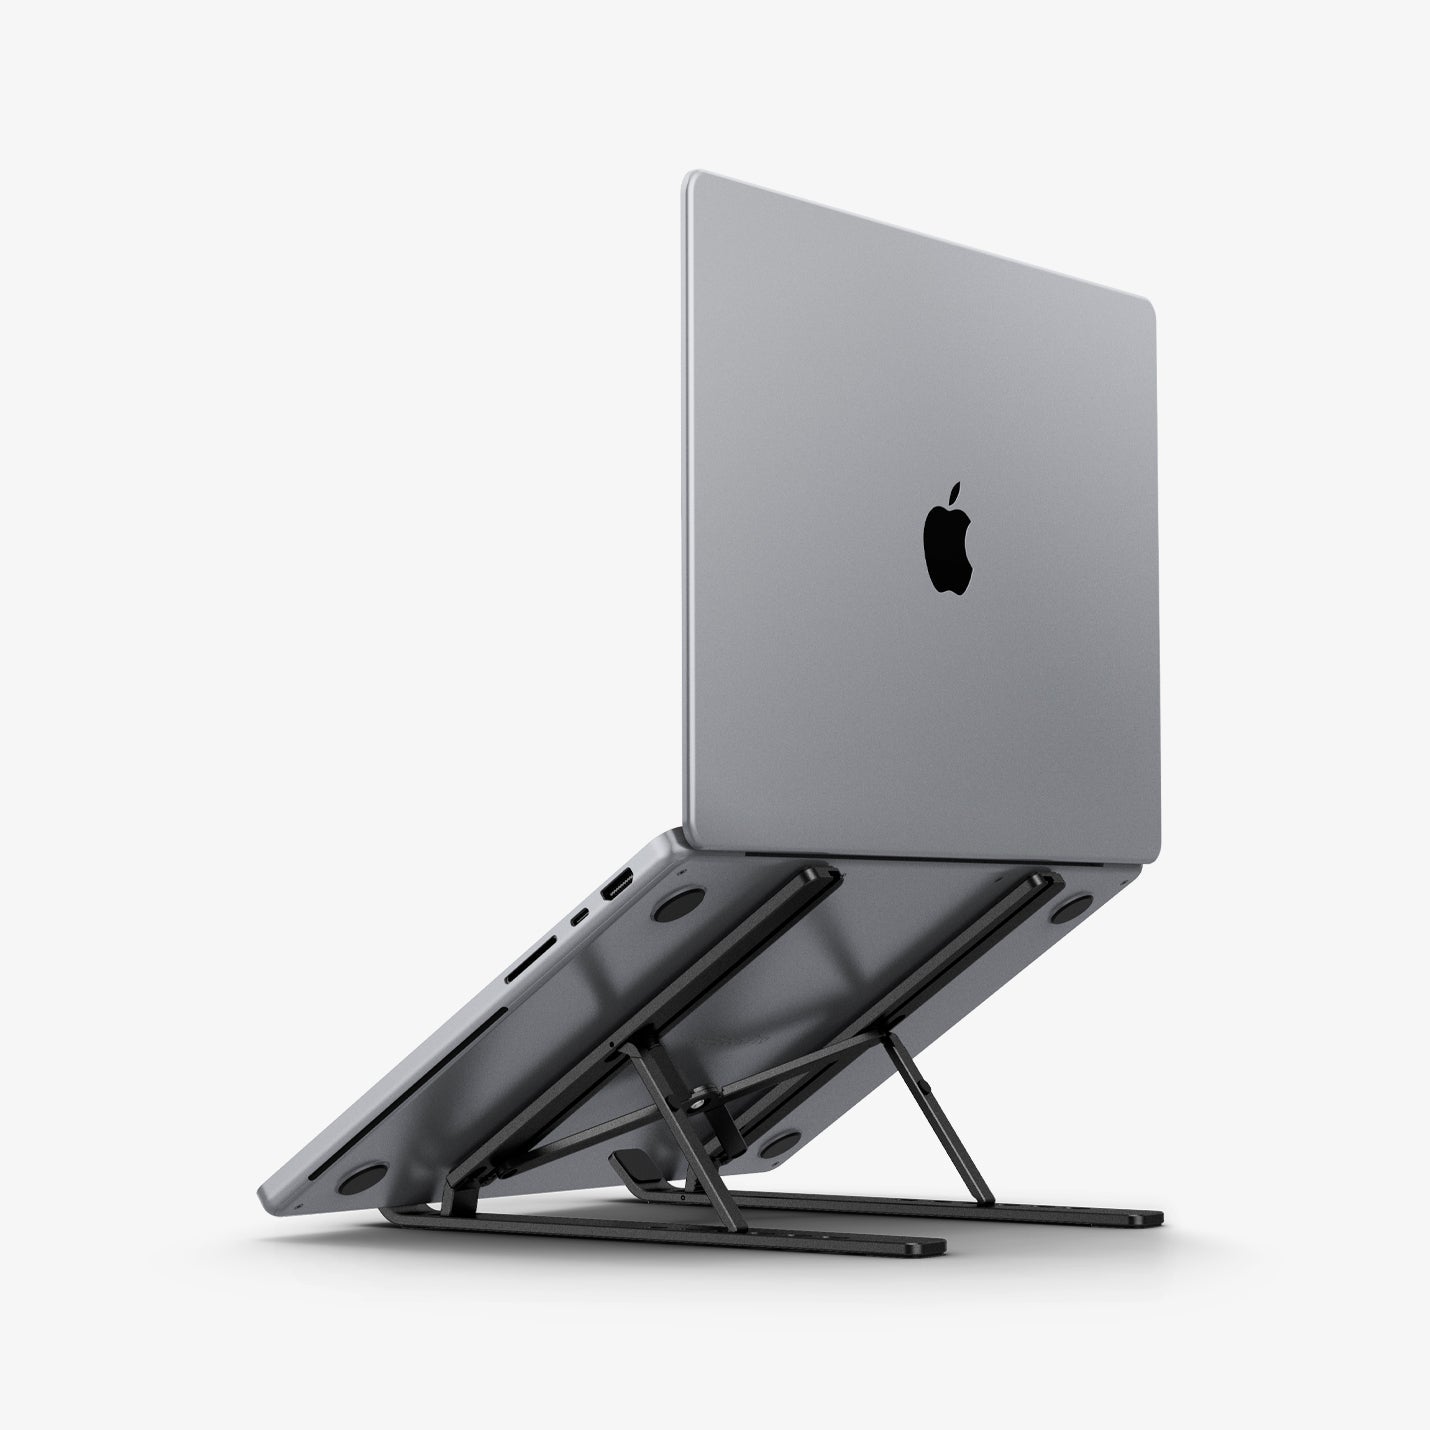 AMP04577 - LD201 Laptop Stand in black showing the back with macbook laptop on the stand